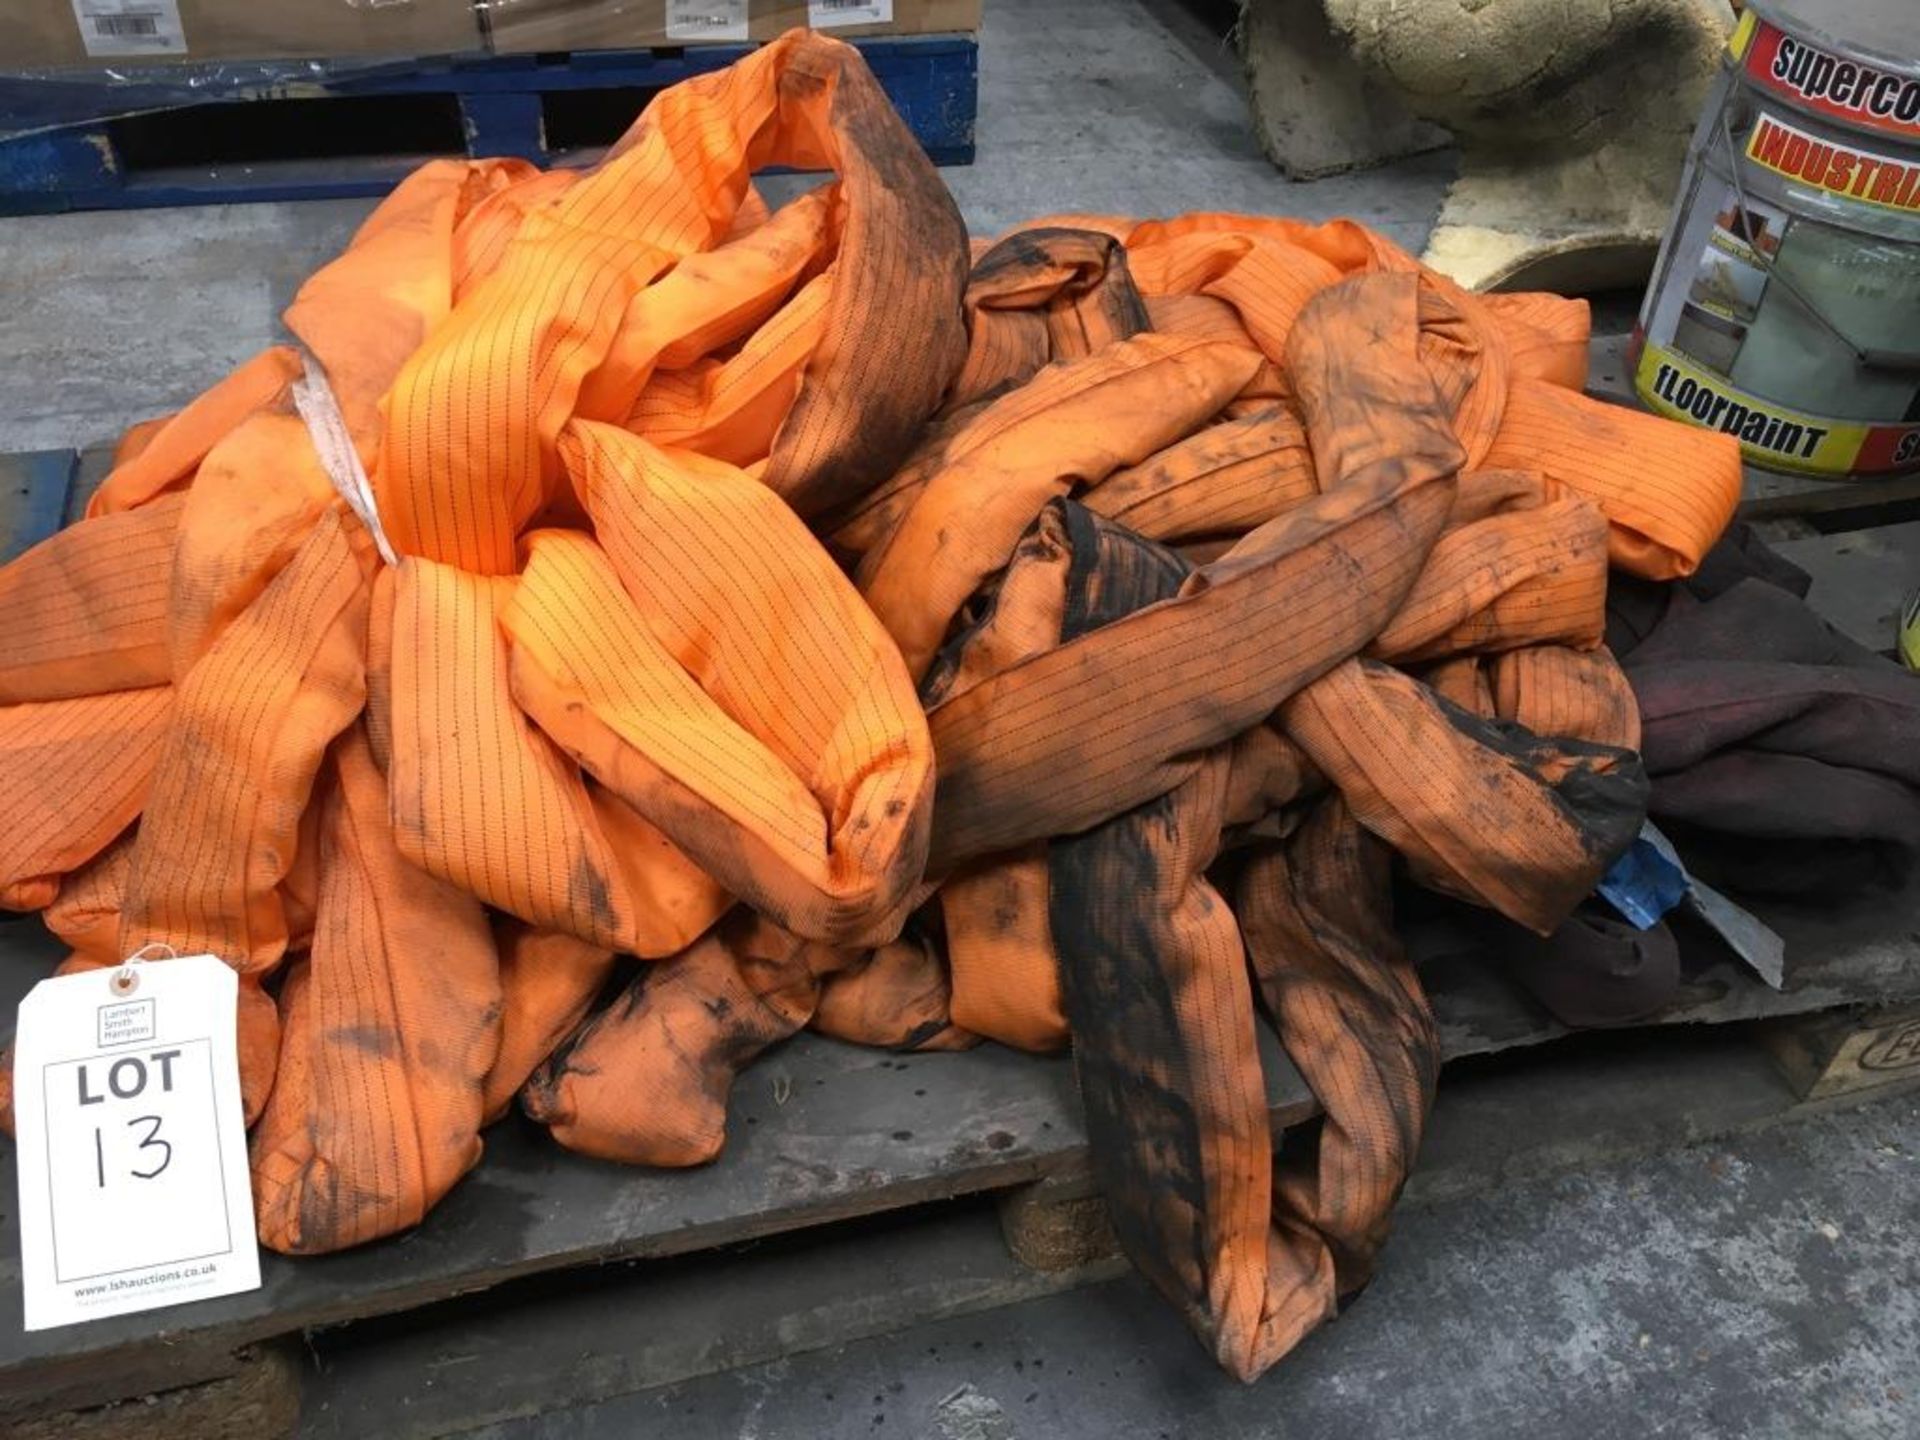 A pallet of lifting slings. Please note: This lot has no record of Thorough Examination. The